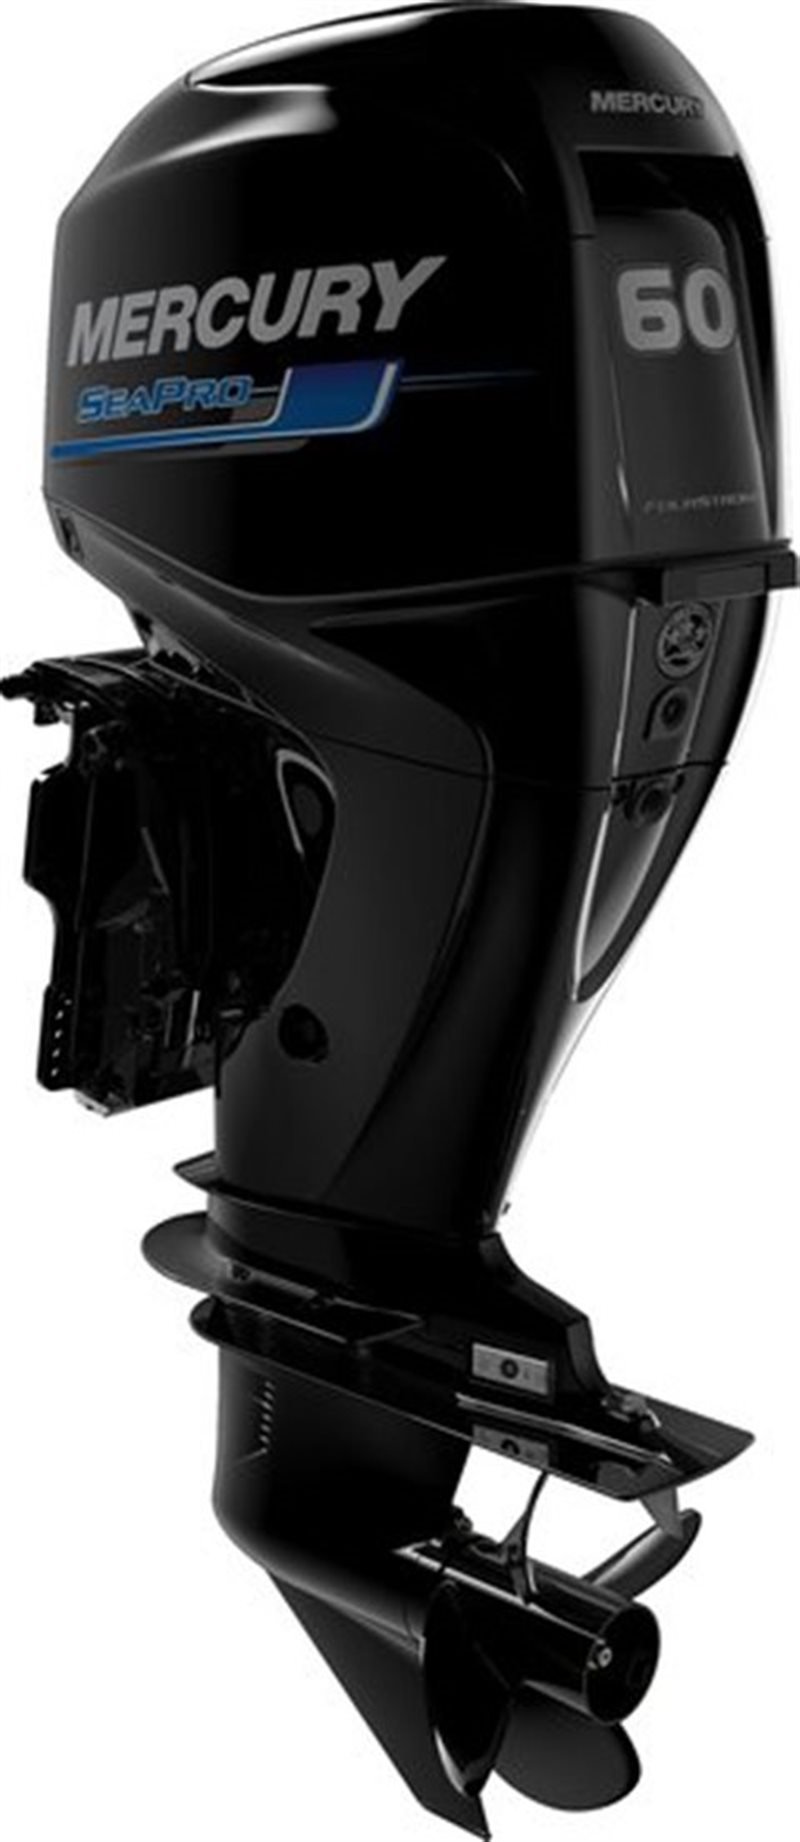 2021 Mercury Outboard SeaPro 15 - 60 hp at Fort Fremont Marine